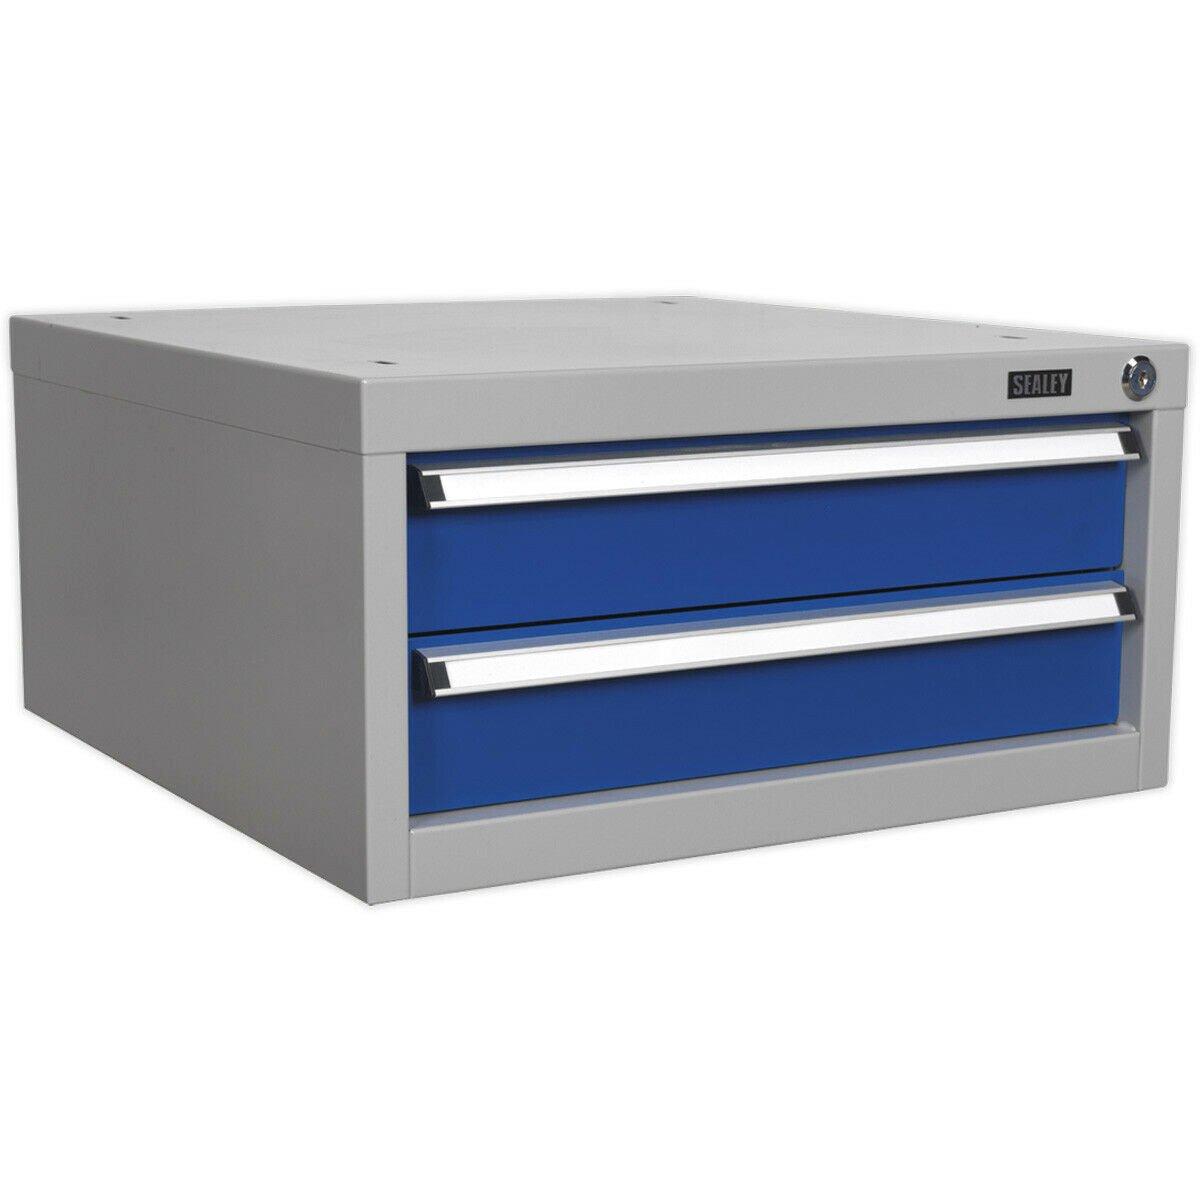 Double Drawer Unit - Suits ys02557 ys02560 & ys02562 Industrial Workbenches